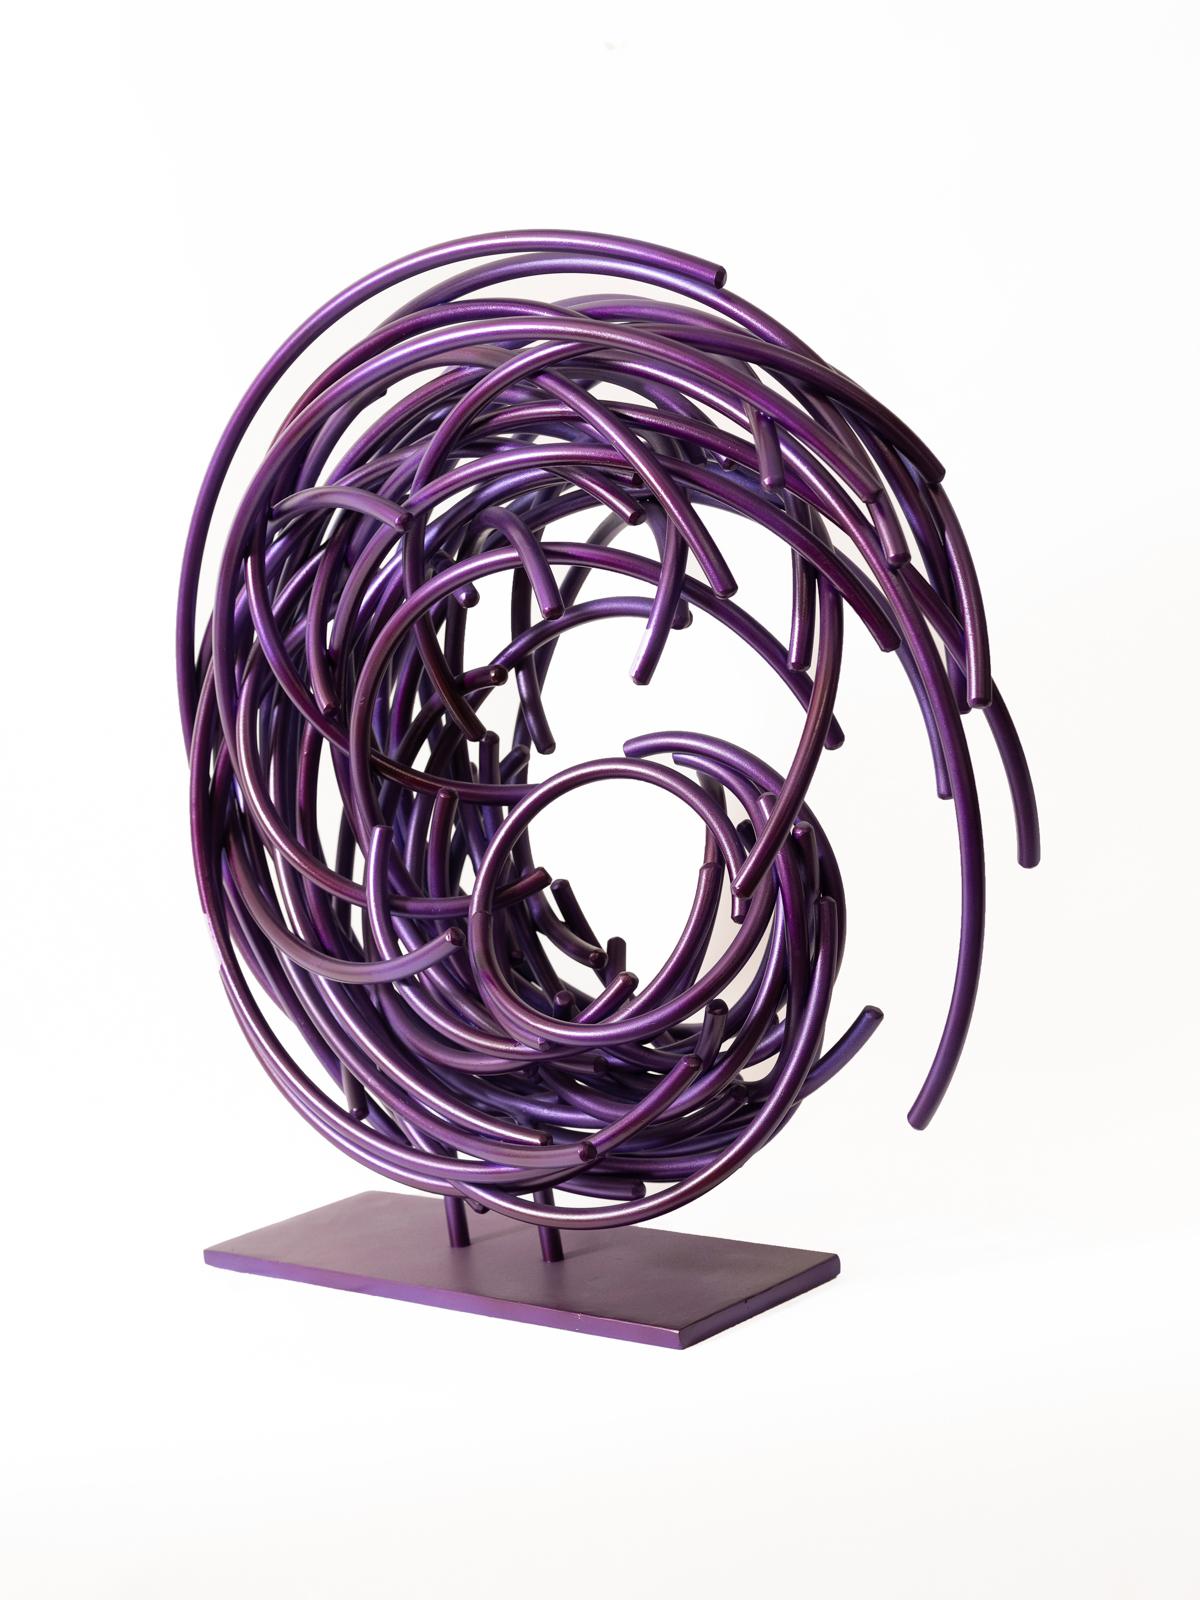 Maelstrom Series No 5 - layered, intersecting, forged aluminum sculpture - Sculpture by Shayne Dark